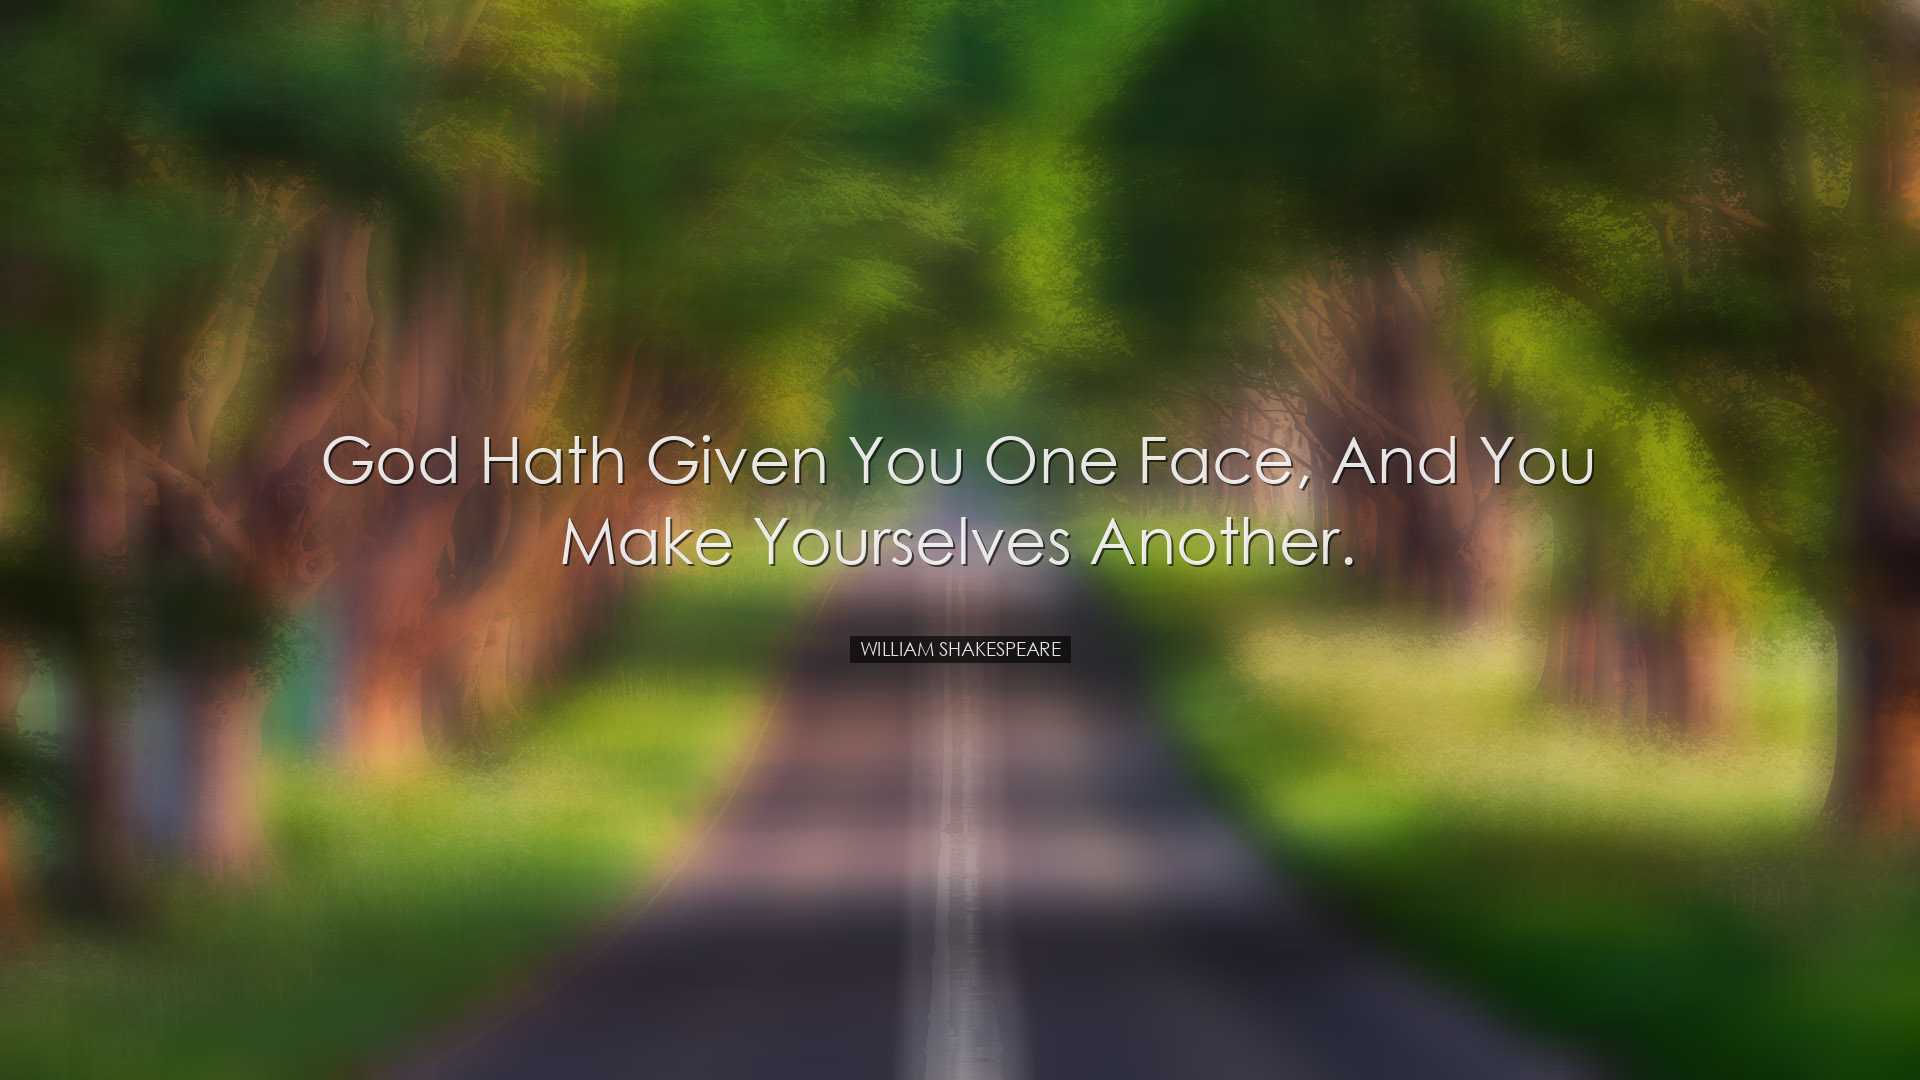 God hath given you one face, and you make yourselves another. - Wi